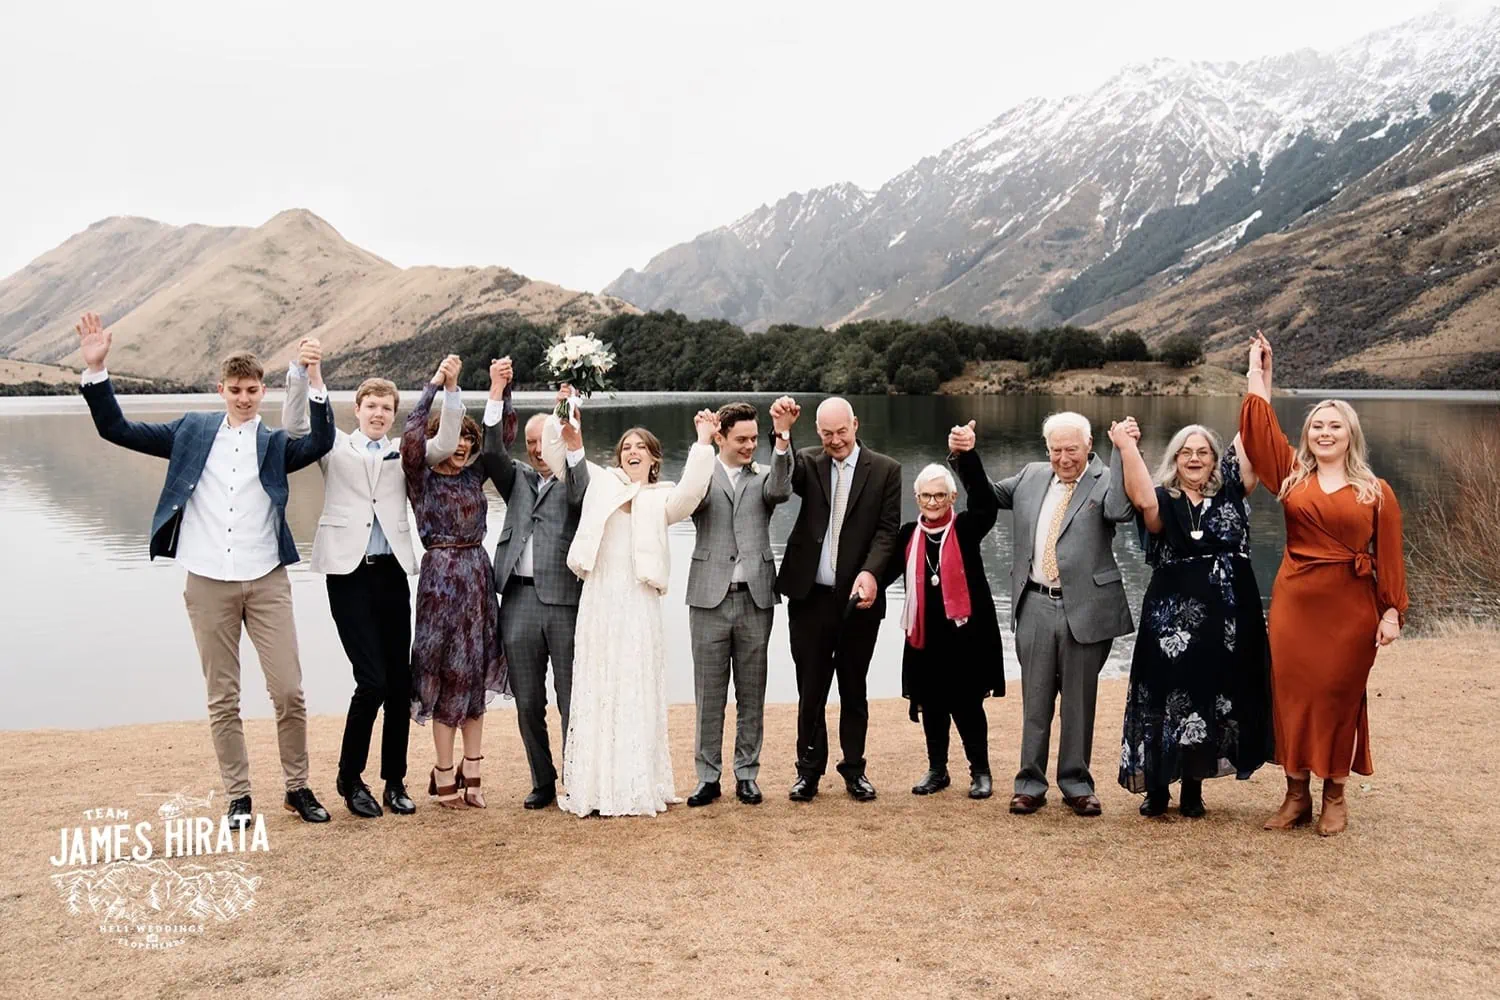 Regan & Jake's Queenstown elopement wedding featuring a group standing in front of a lake with mountains as the backdrop.